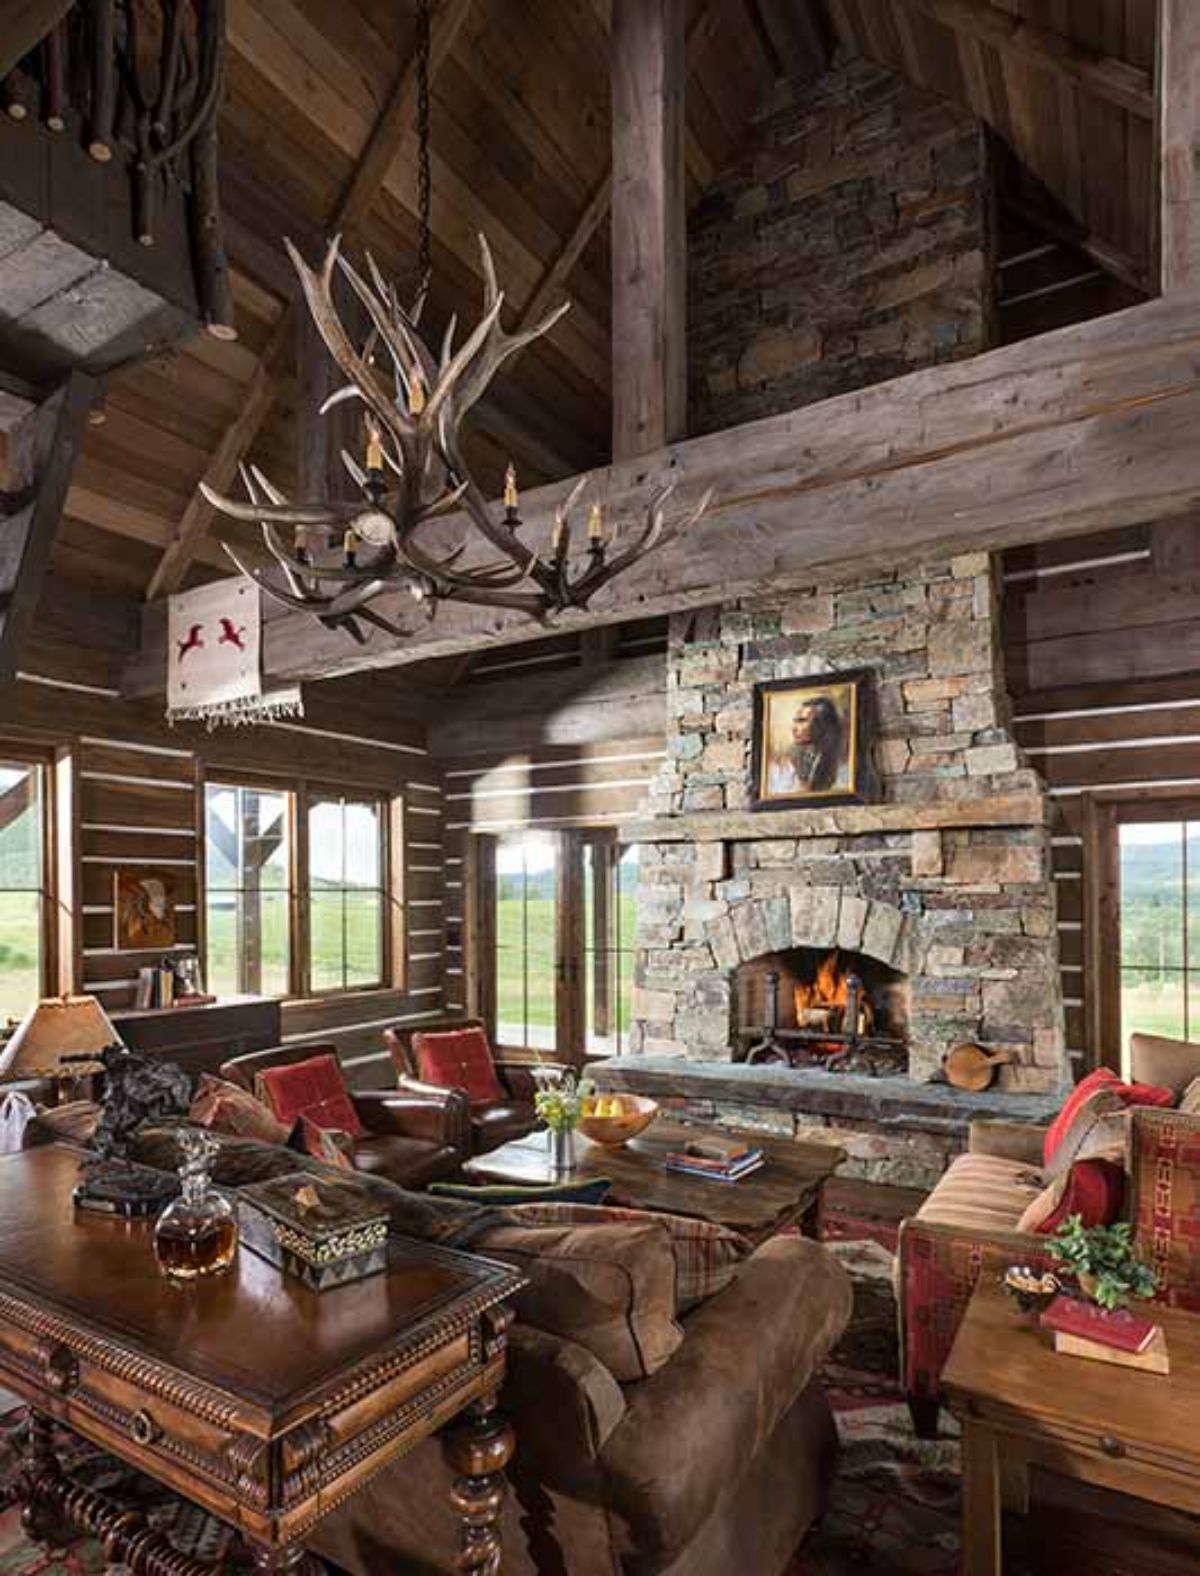 stone fireplace on right side of image with windows on both sides and brown leather chairs in foreground